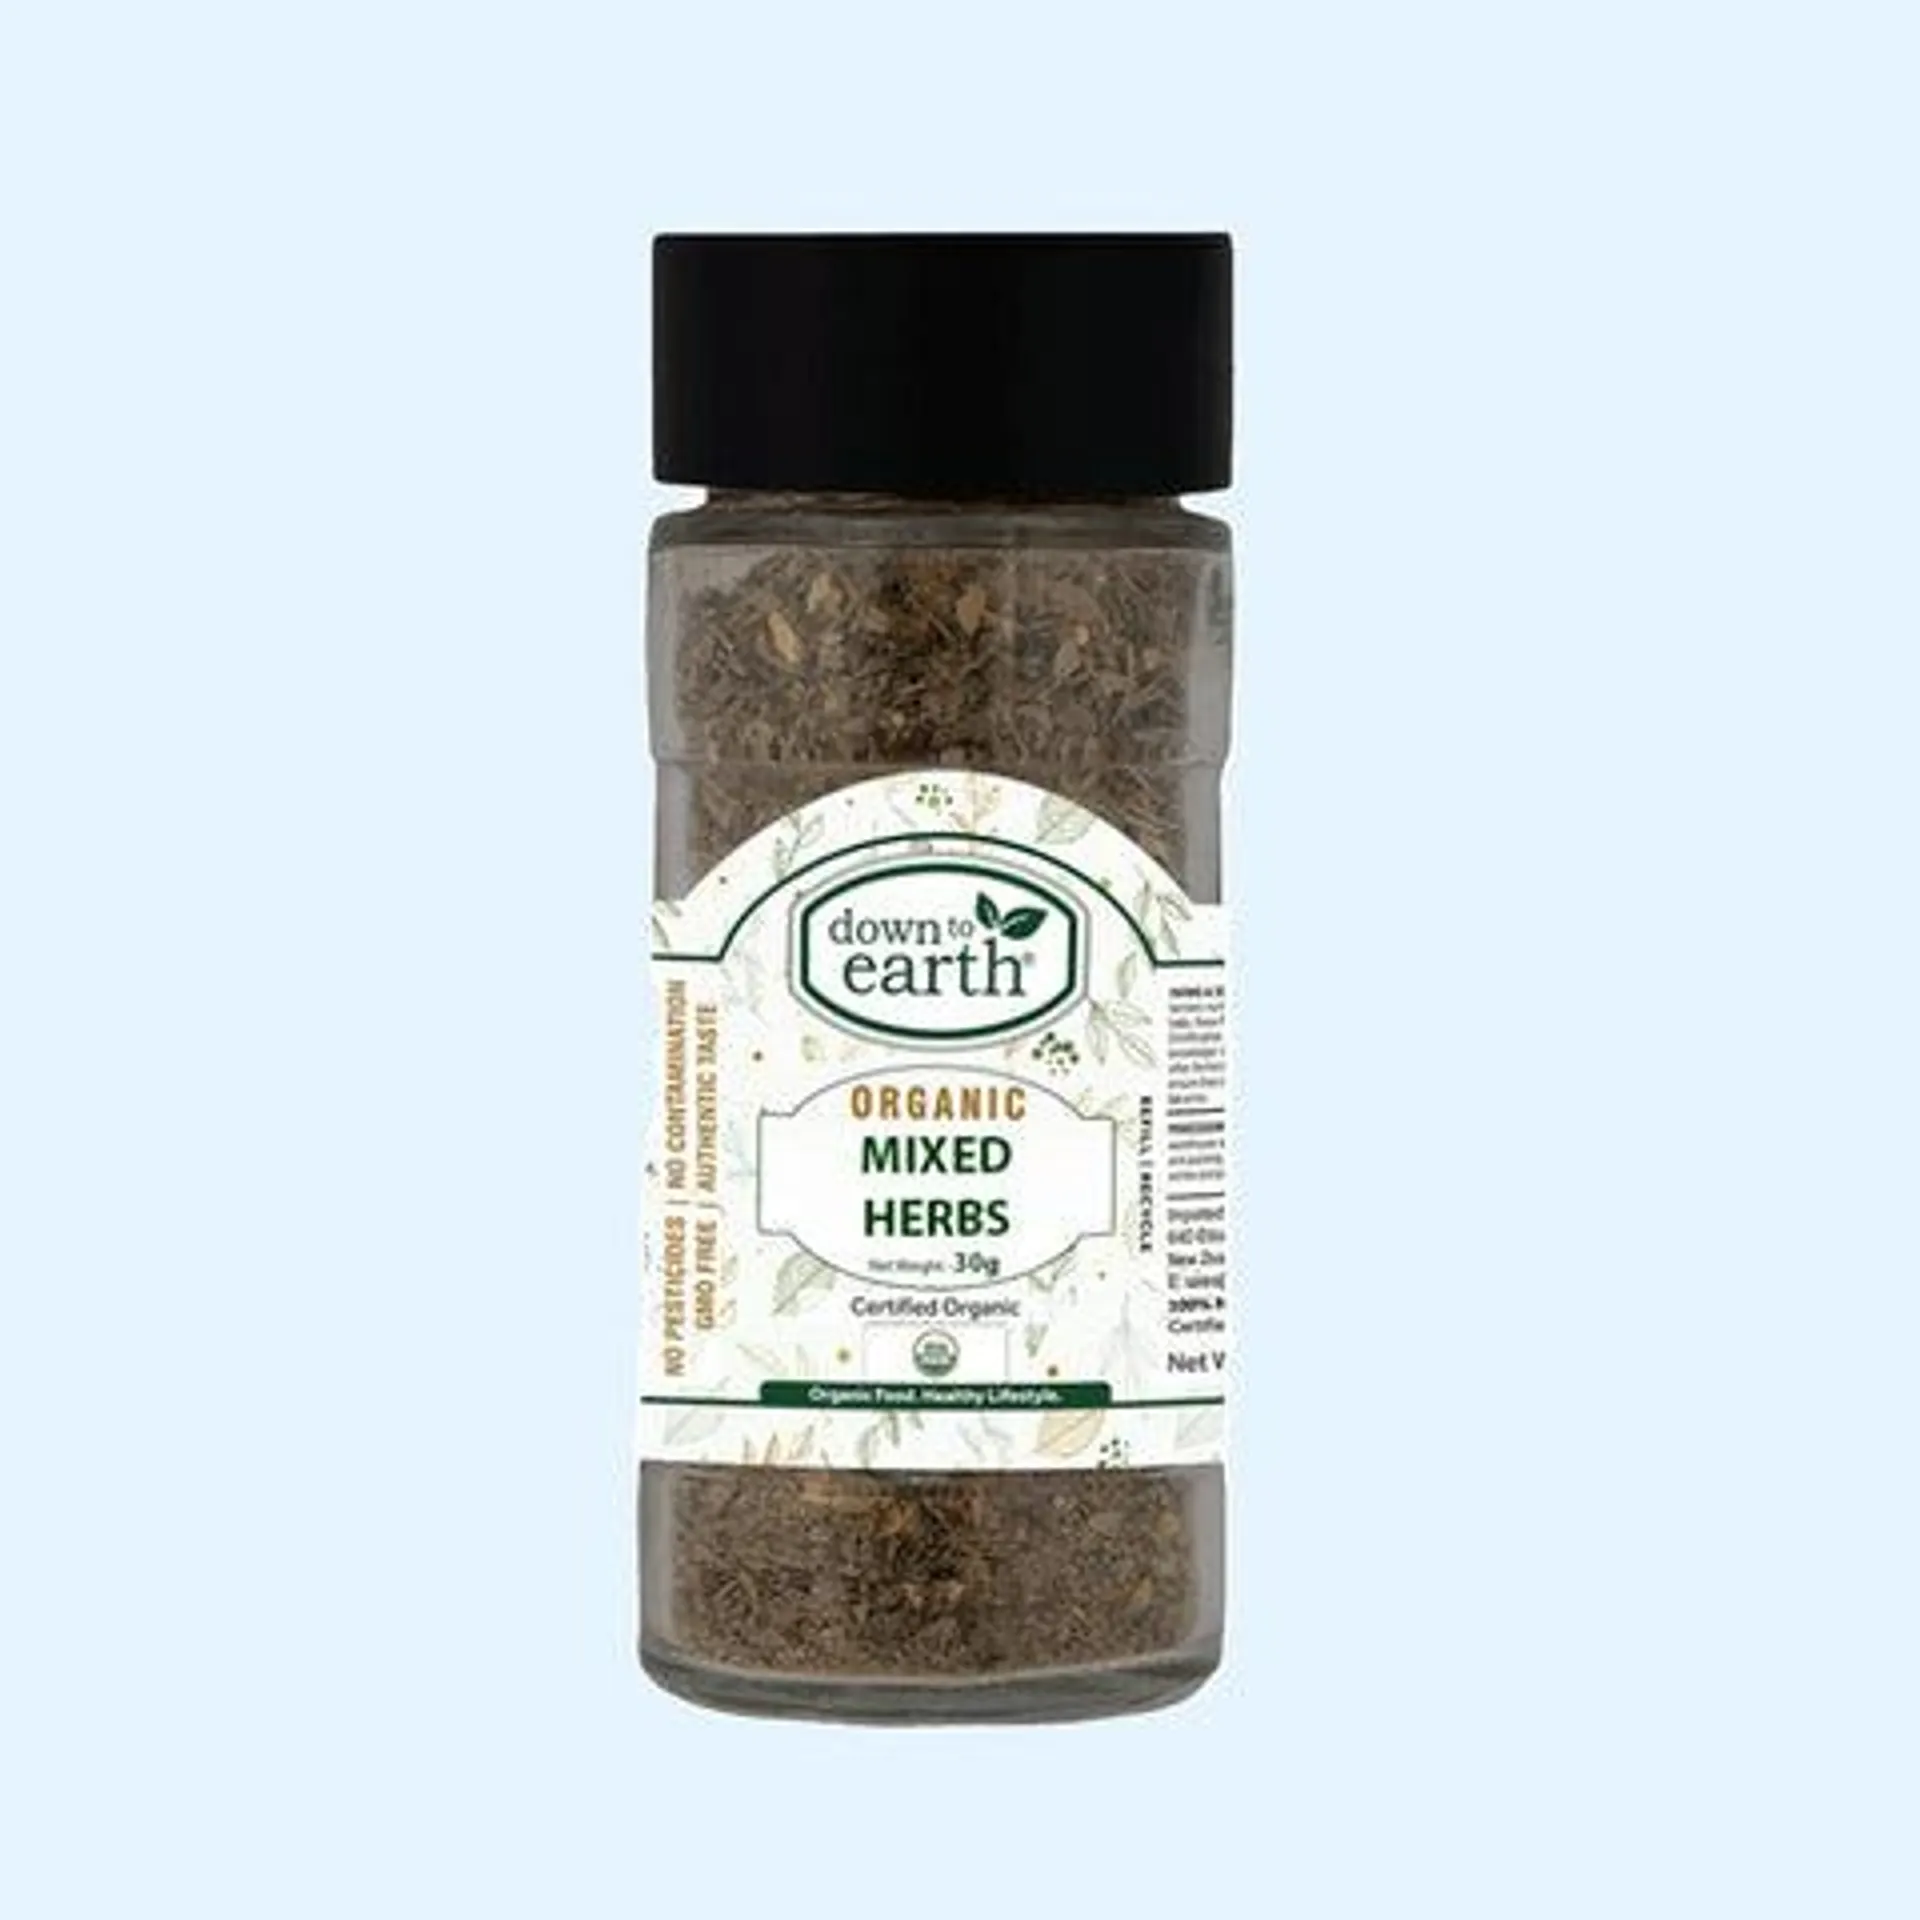 Down To Earth Mixed Herbs 30g